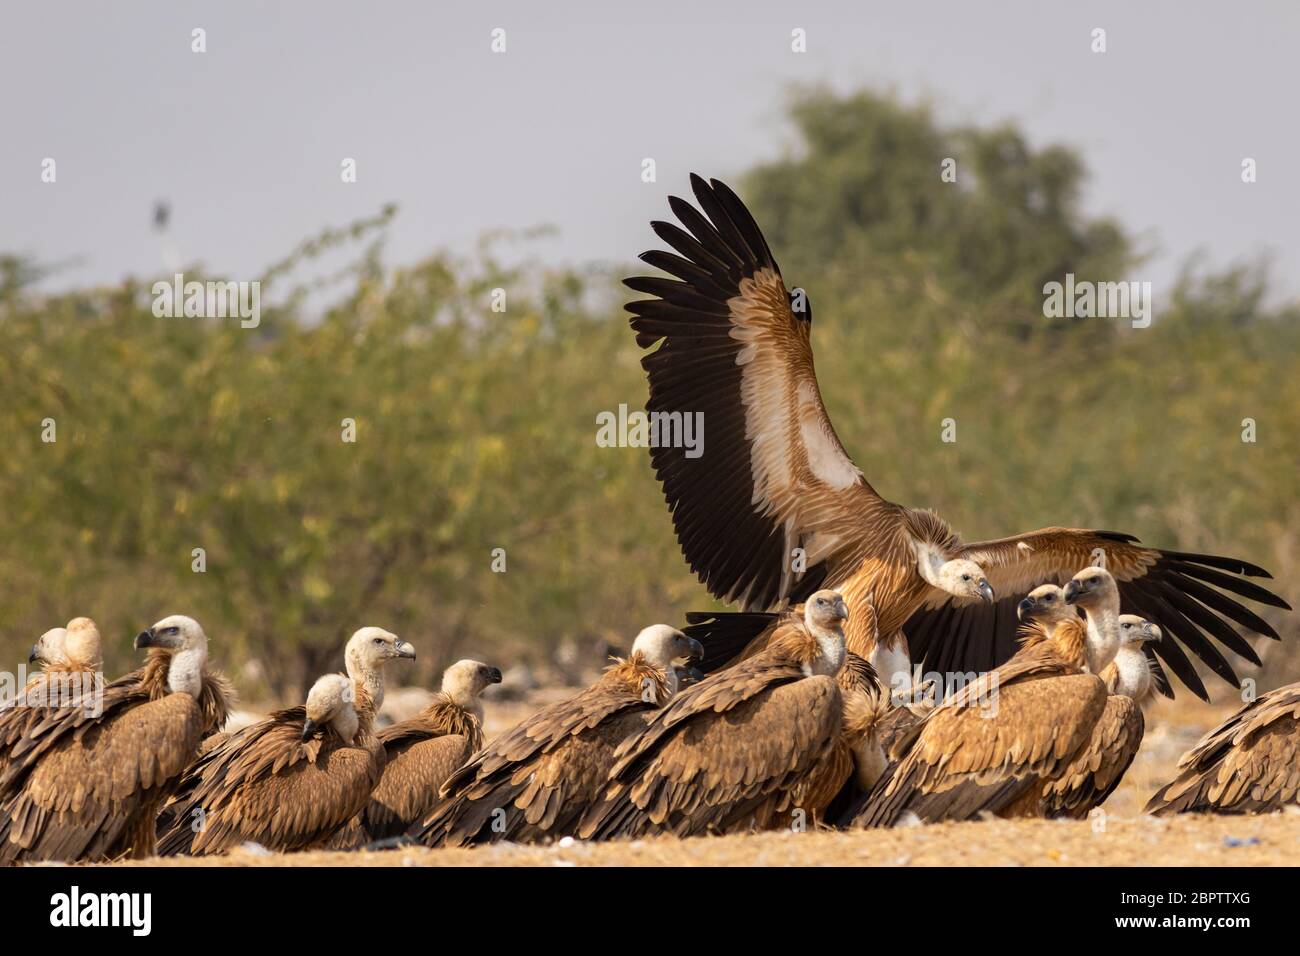 Griffon vulture or Eurasian Griffon or Gyps fulvus in flight with full wingspan at jorbeer conservation reserve, bikaner, rajasthan, india Stock Photo